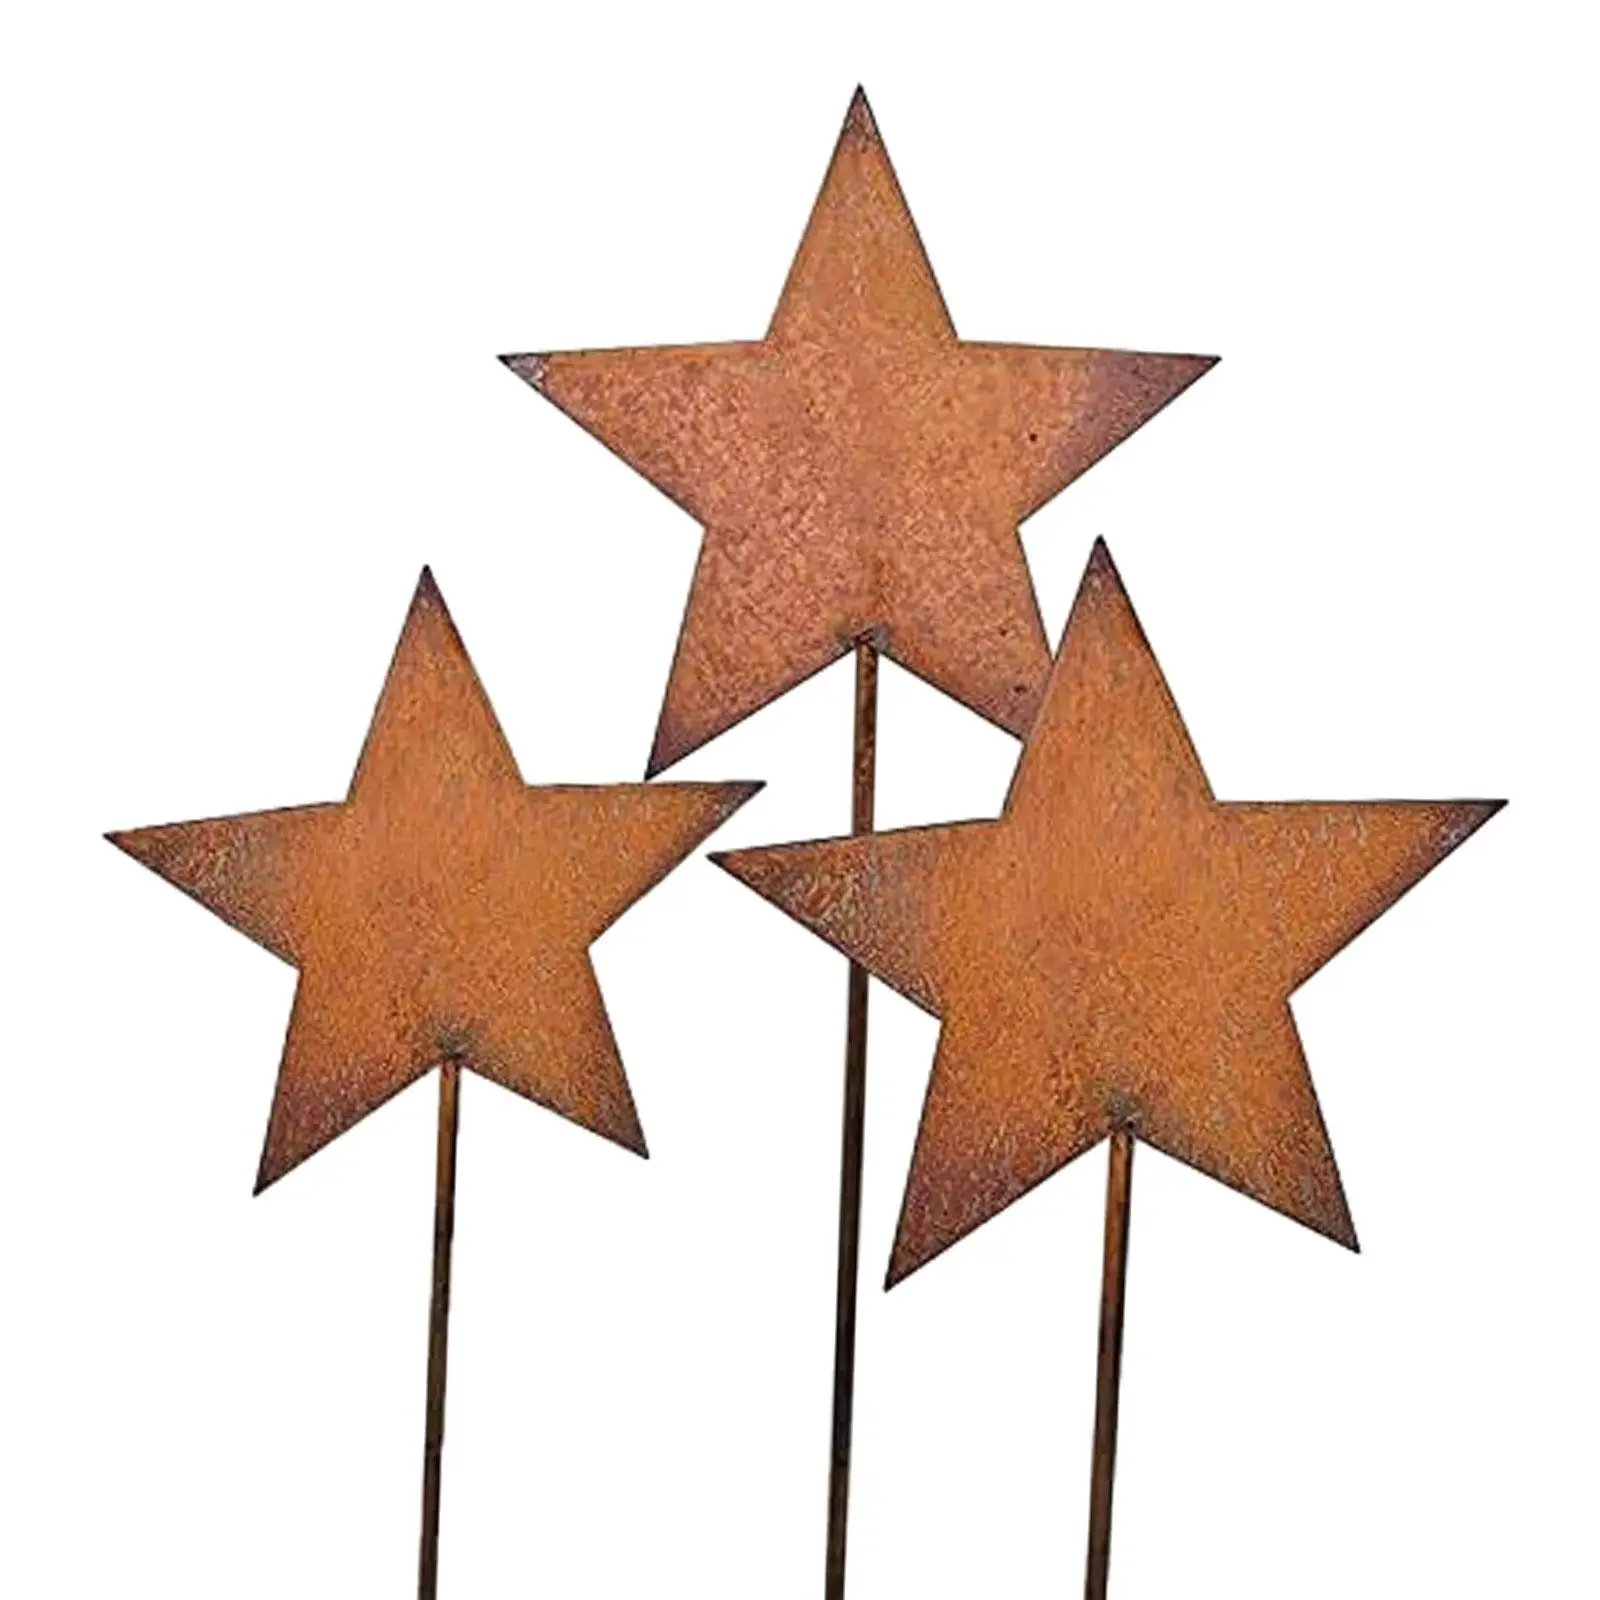 

3x Decorative Garden Stakes Star Easy to Install Ornaments Garden Decor Yard Decorations for Outside Lawn Patio Home Decor